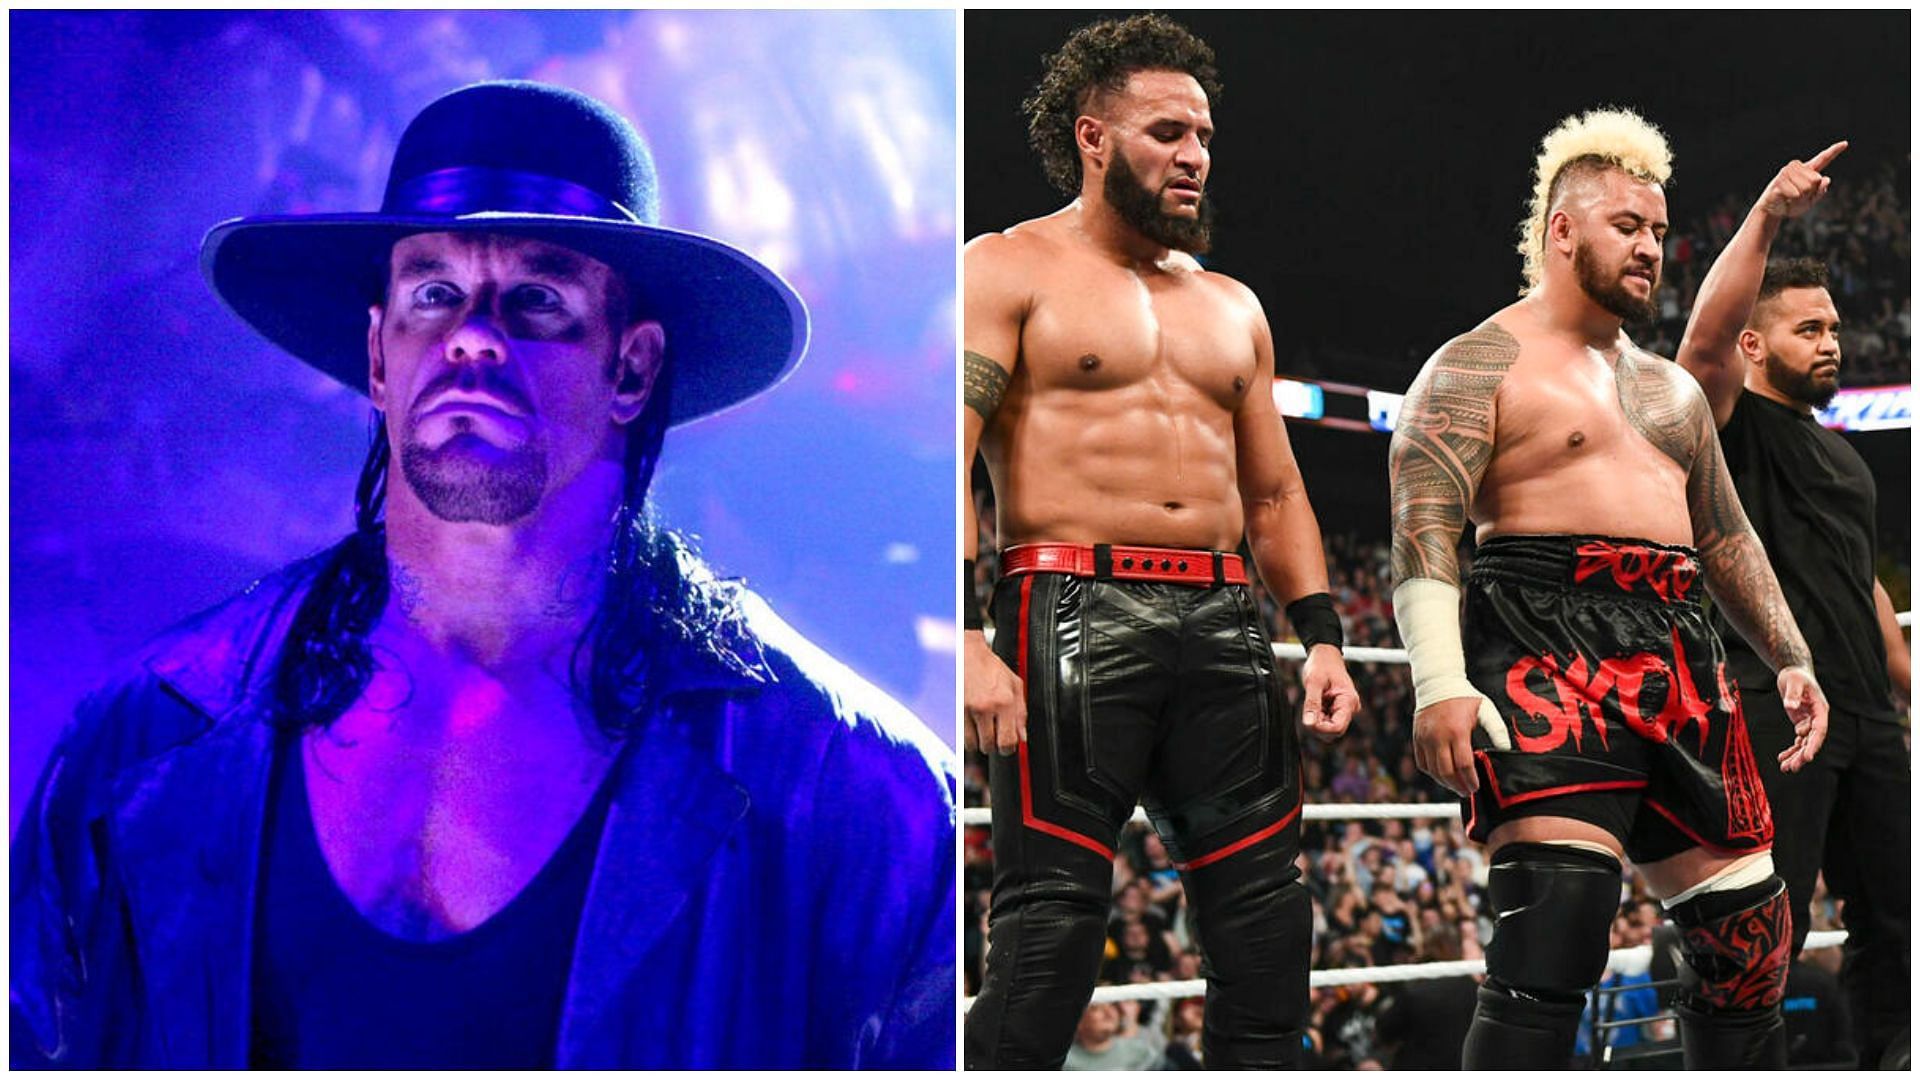 The Undertaker (left); and The Bloodline at WWE Backlash (right).